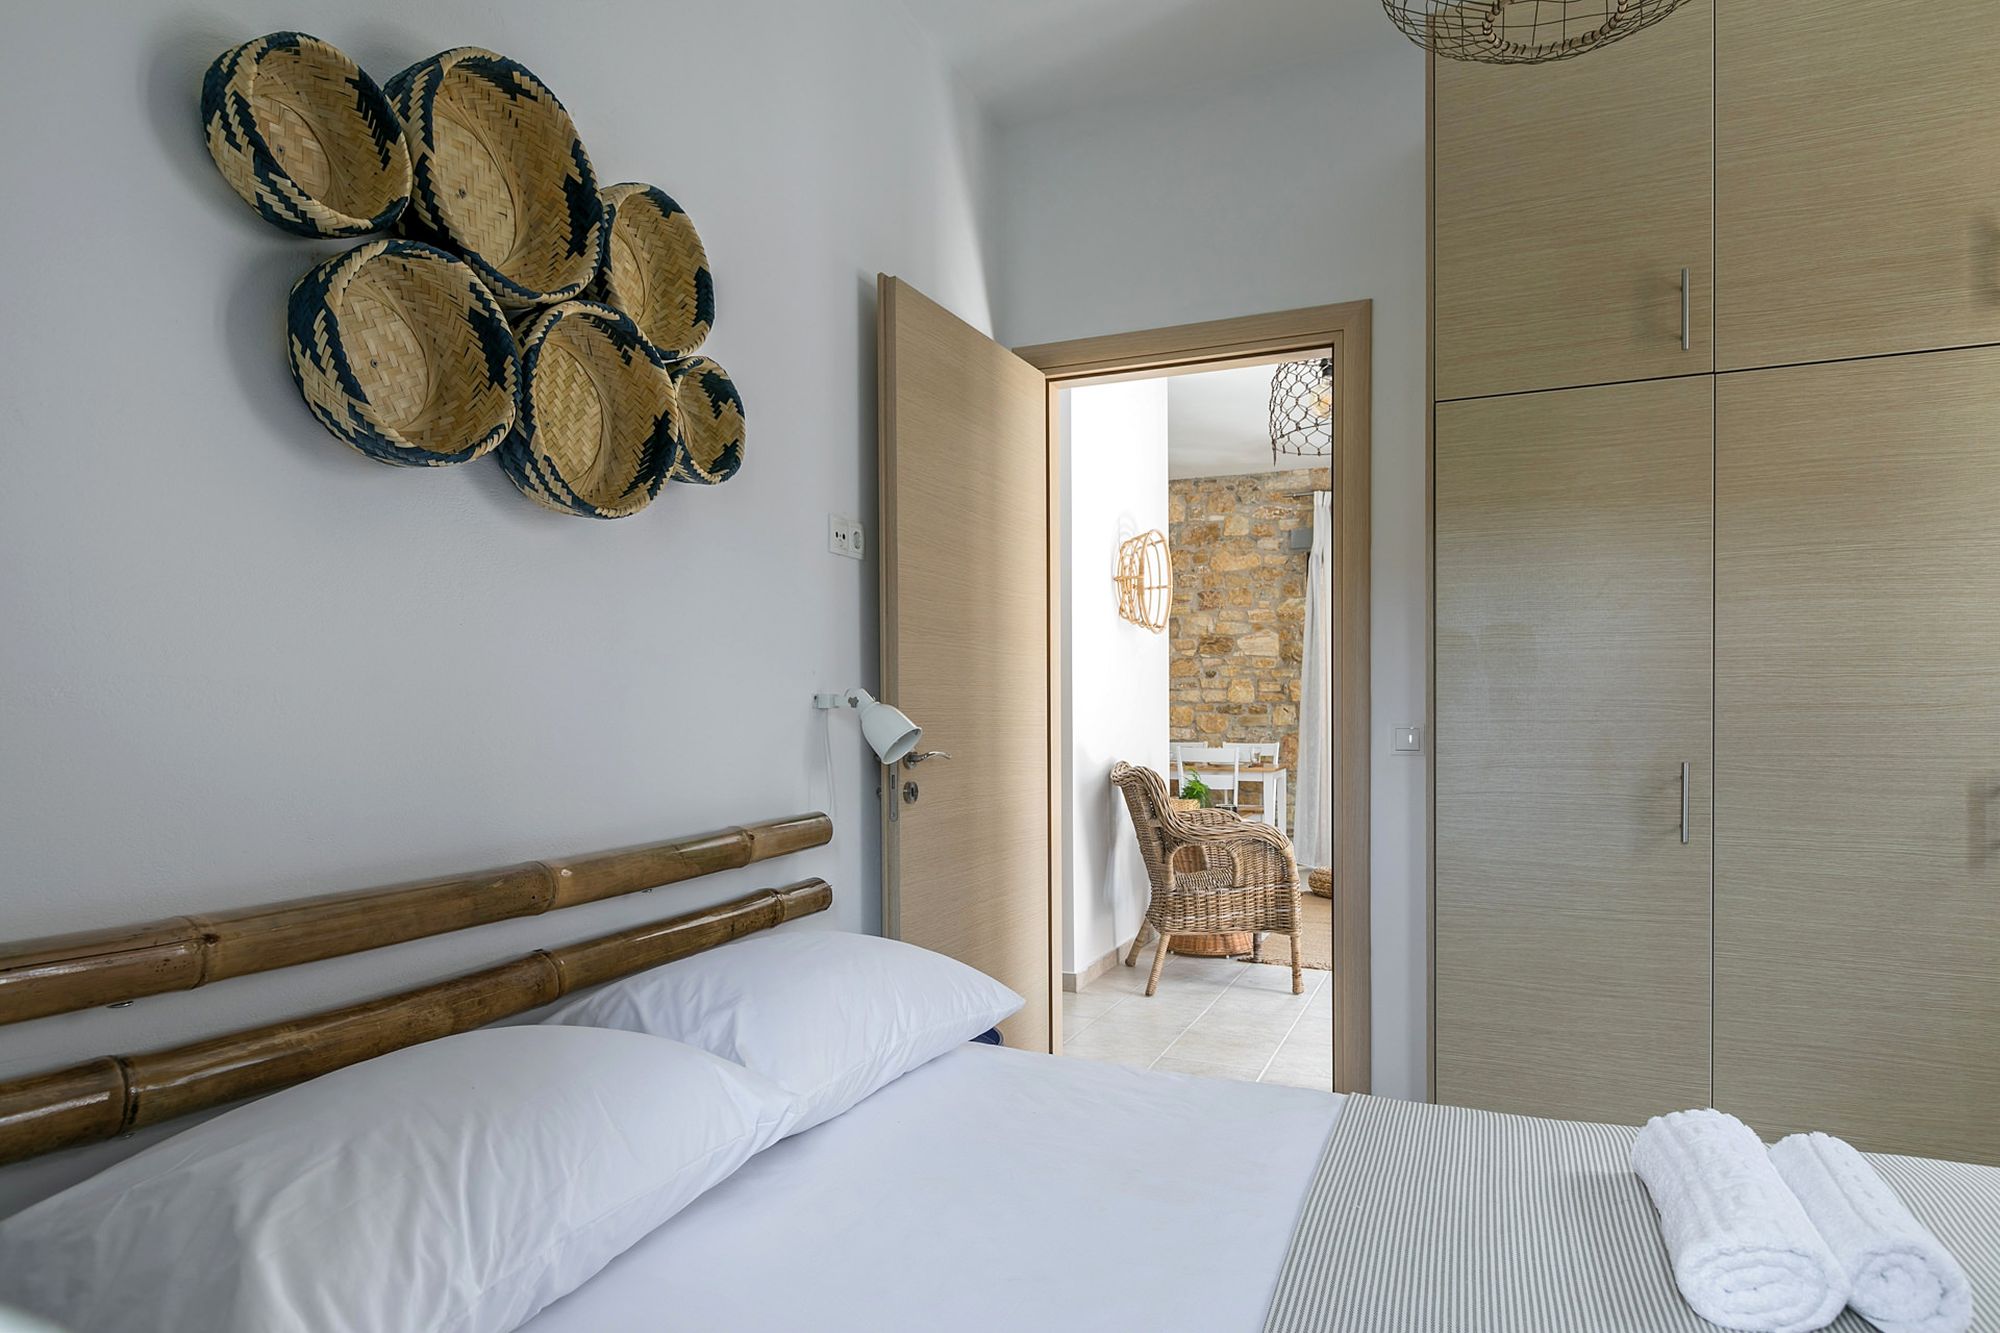 Bedroom with a double bed and decoration with bamboo masts and wicker objects on the wall over the bed.